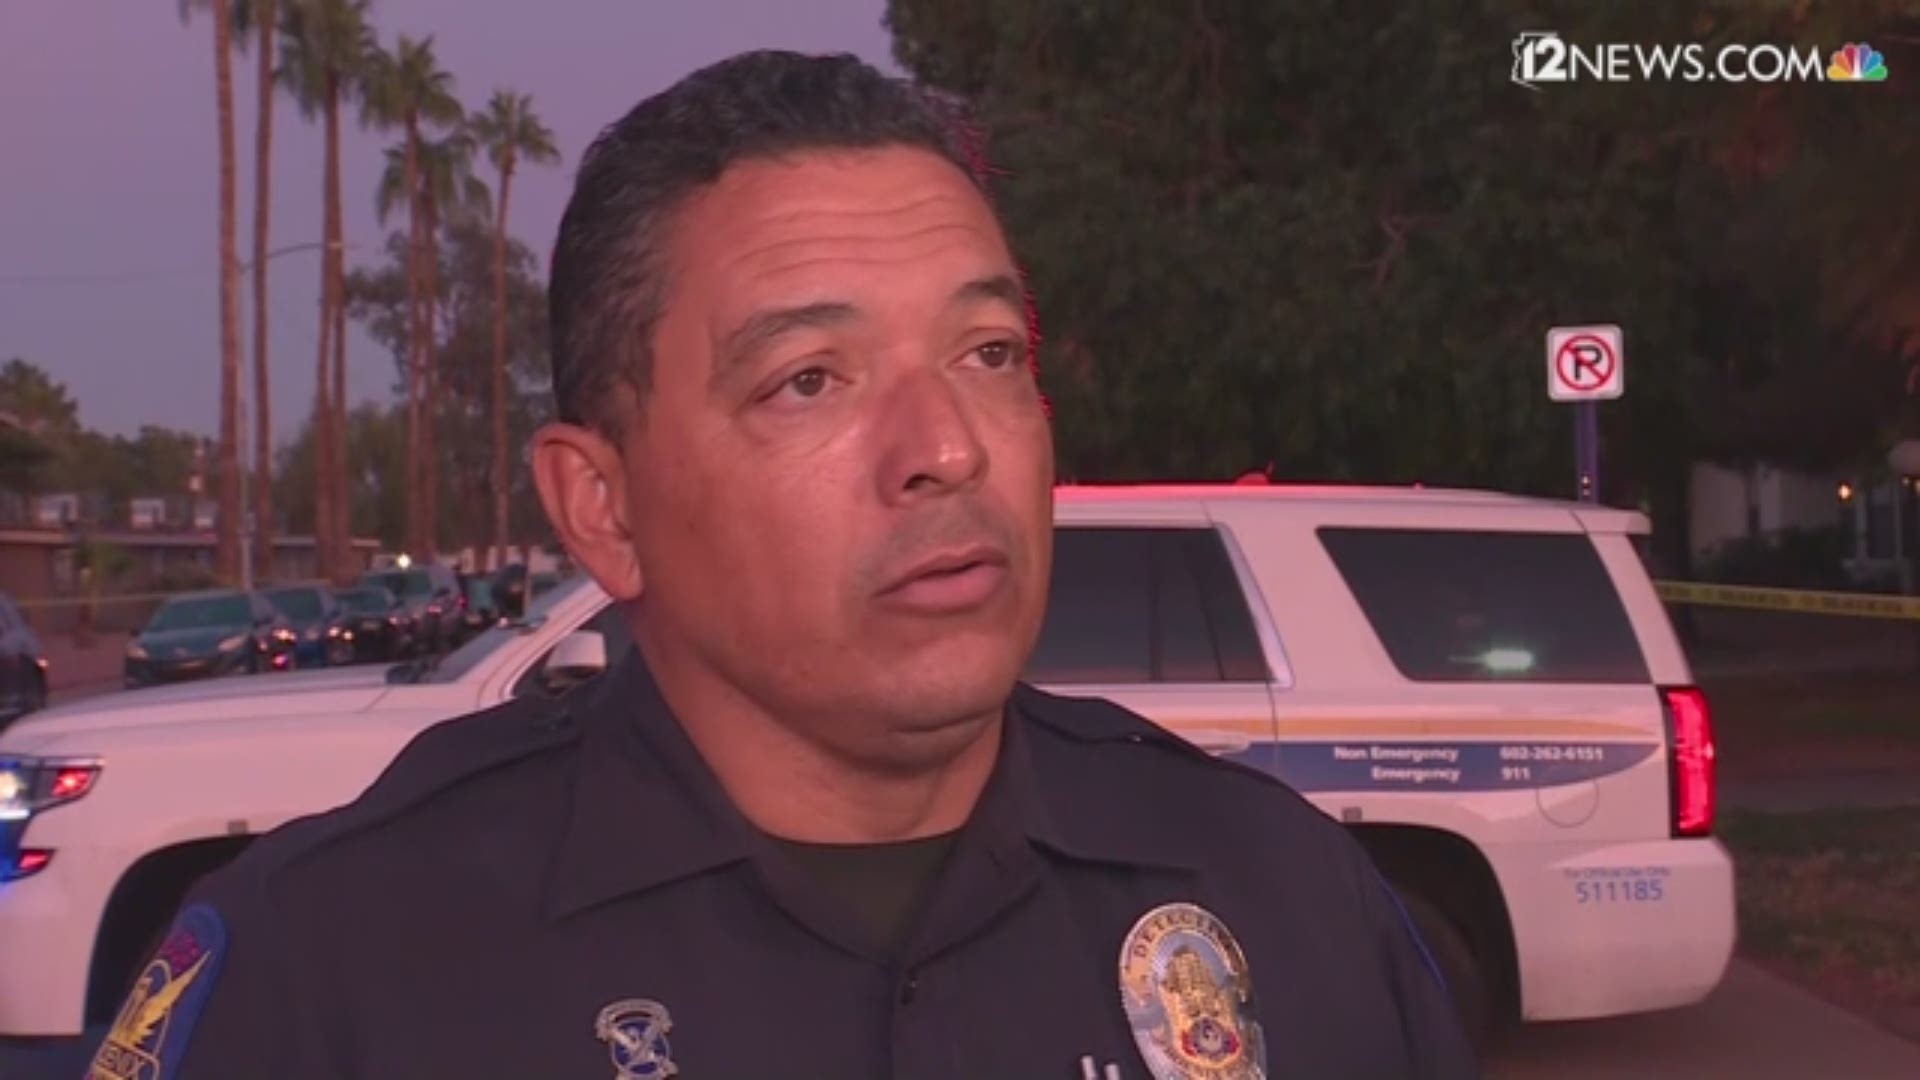 Det. Luis Samudio gave reporters an update on a pedestrian-involved crash in Phoenix on Wednesday that injured a young girl.